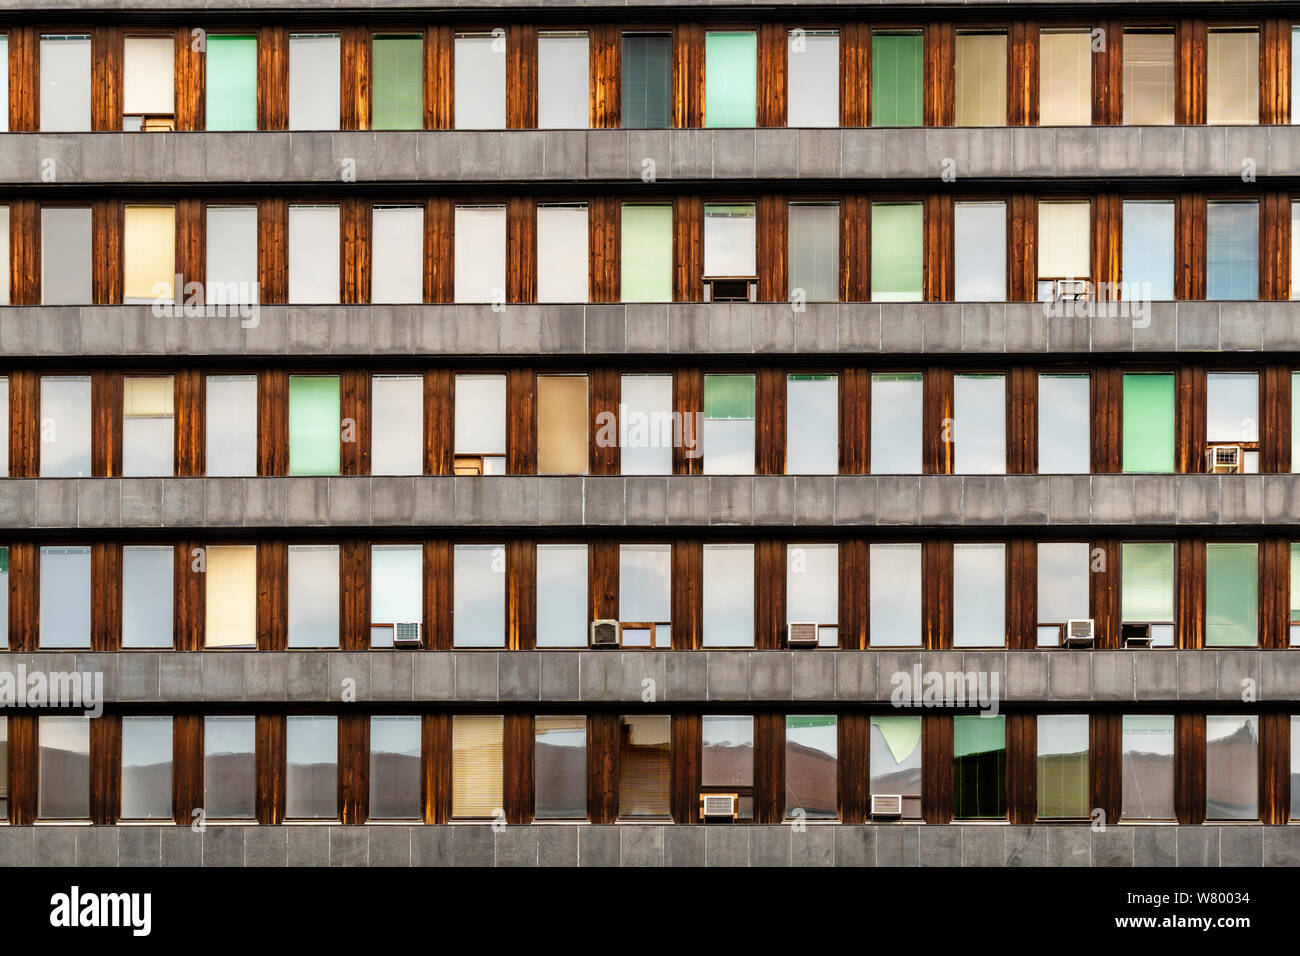 Evening reflections on small aligned windows. Architecture details. Stock Photo